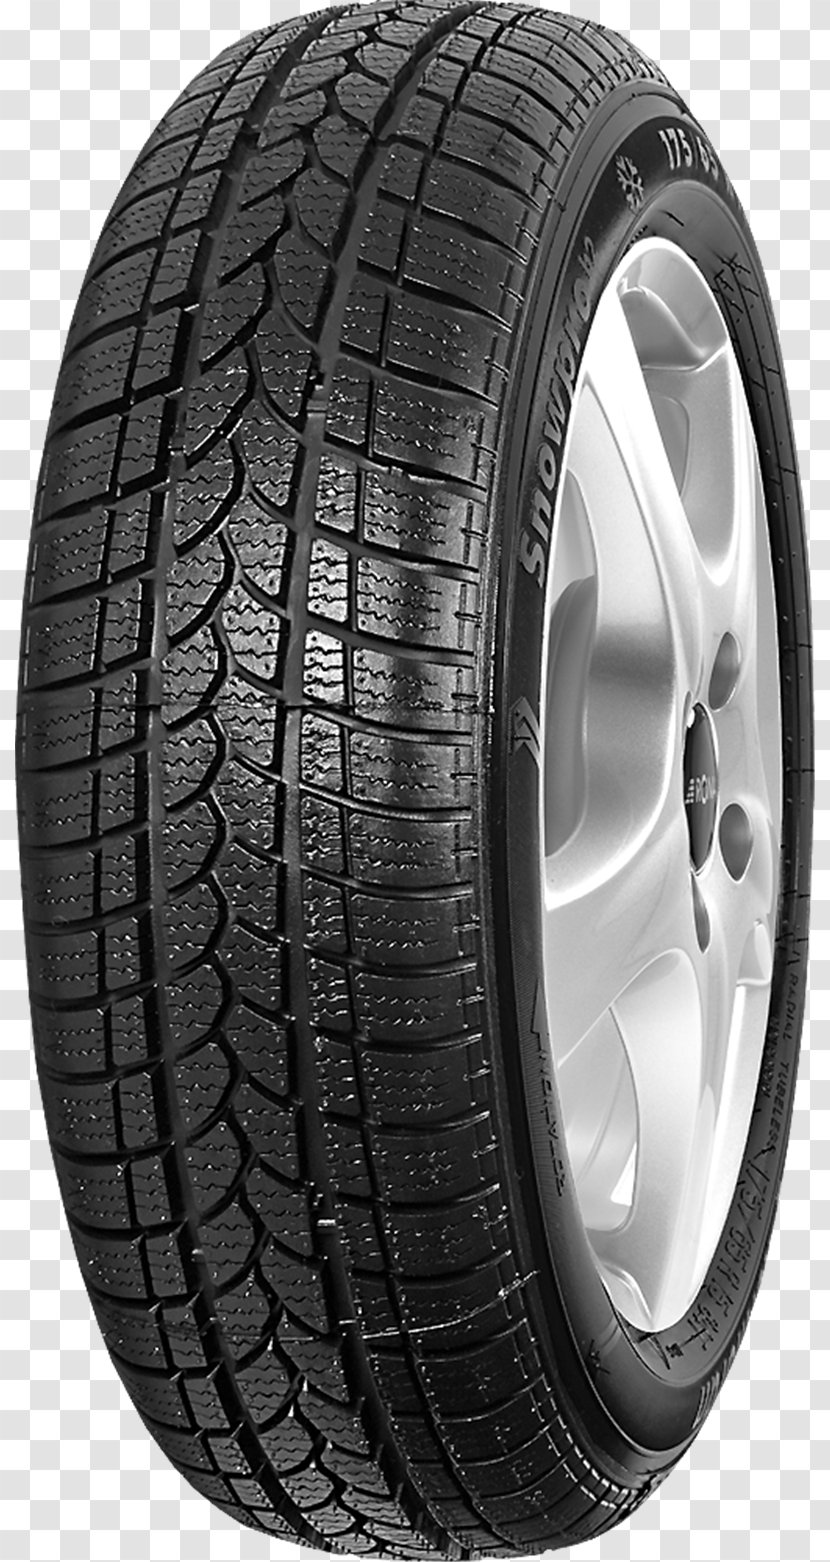 Tire Michelin Car Wheel Continental AG - Natural Rubber Transparent PNG